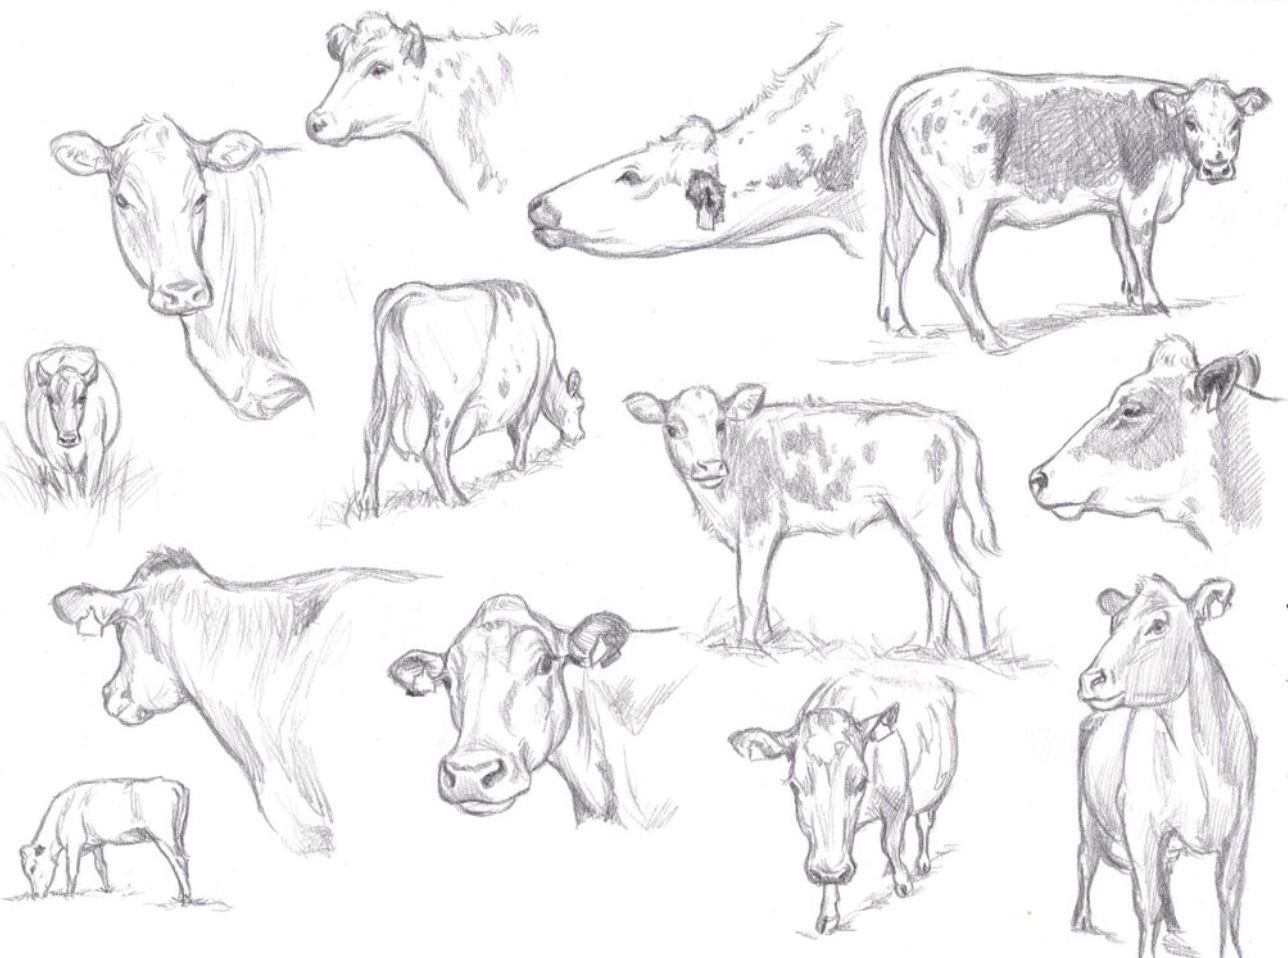 Cow drawing reference